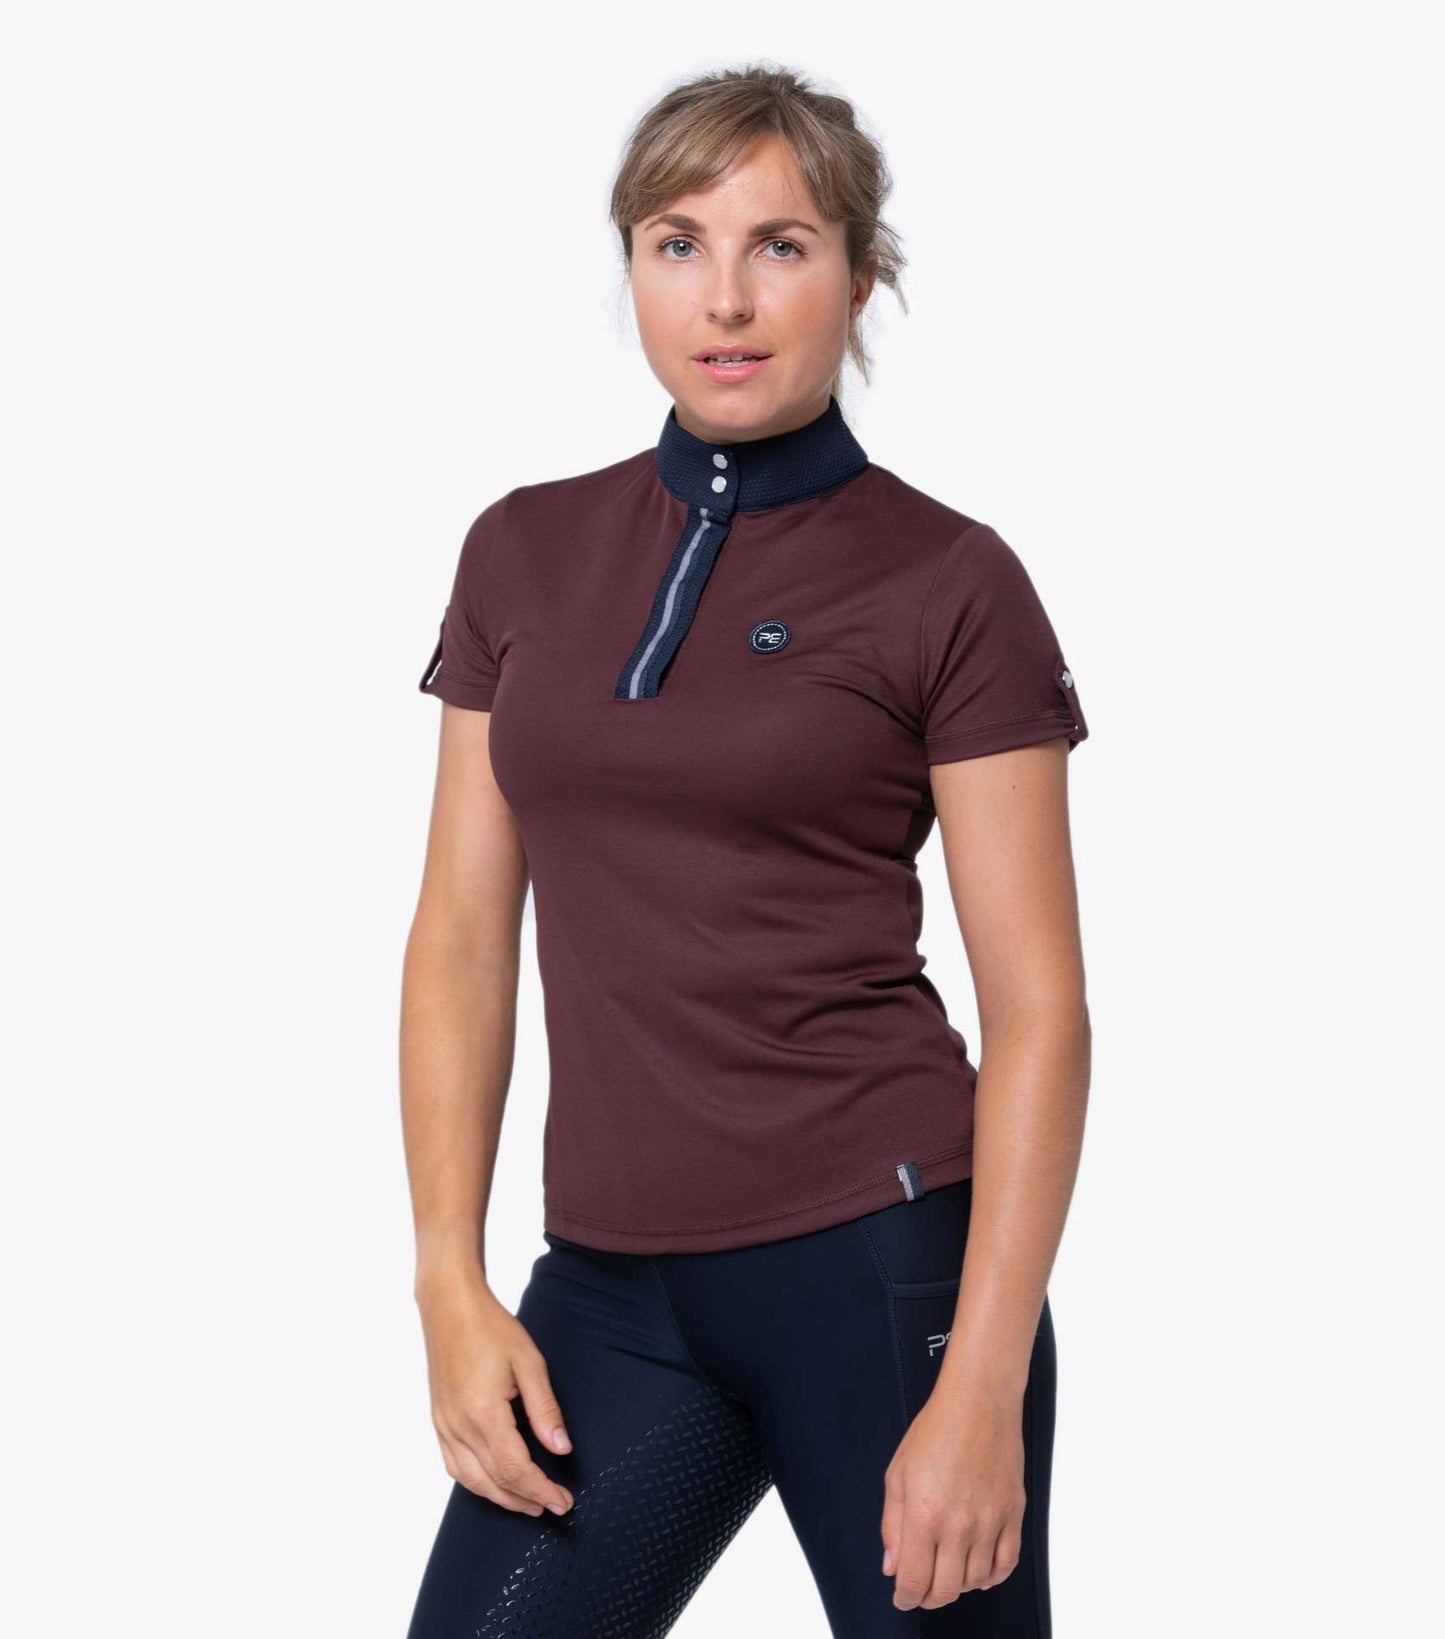 Premier Equine Amia Ladies Technical Short Sleeved Riding Top